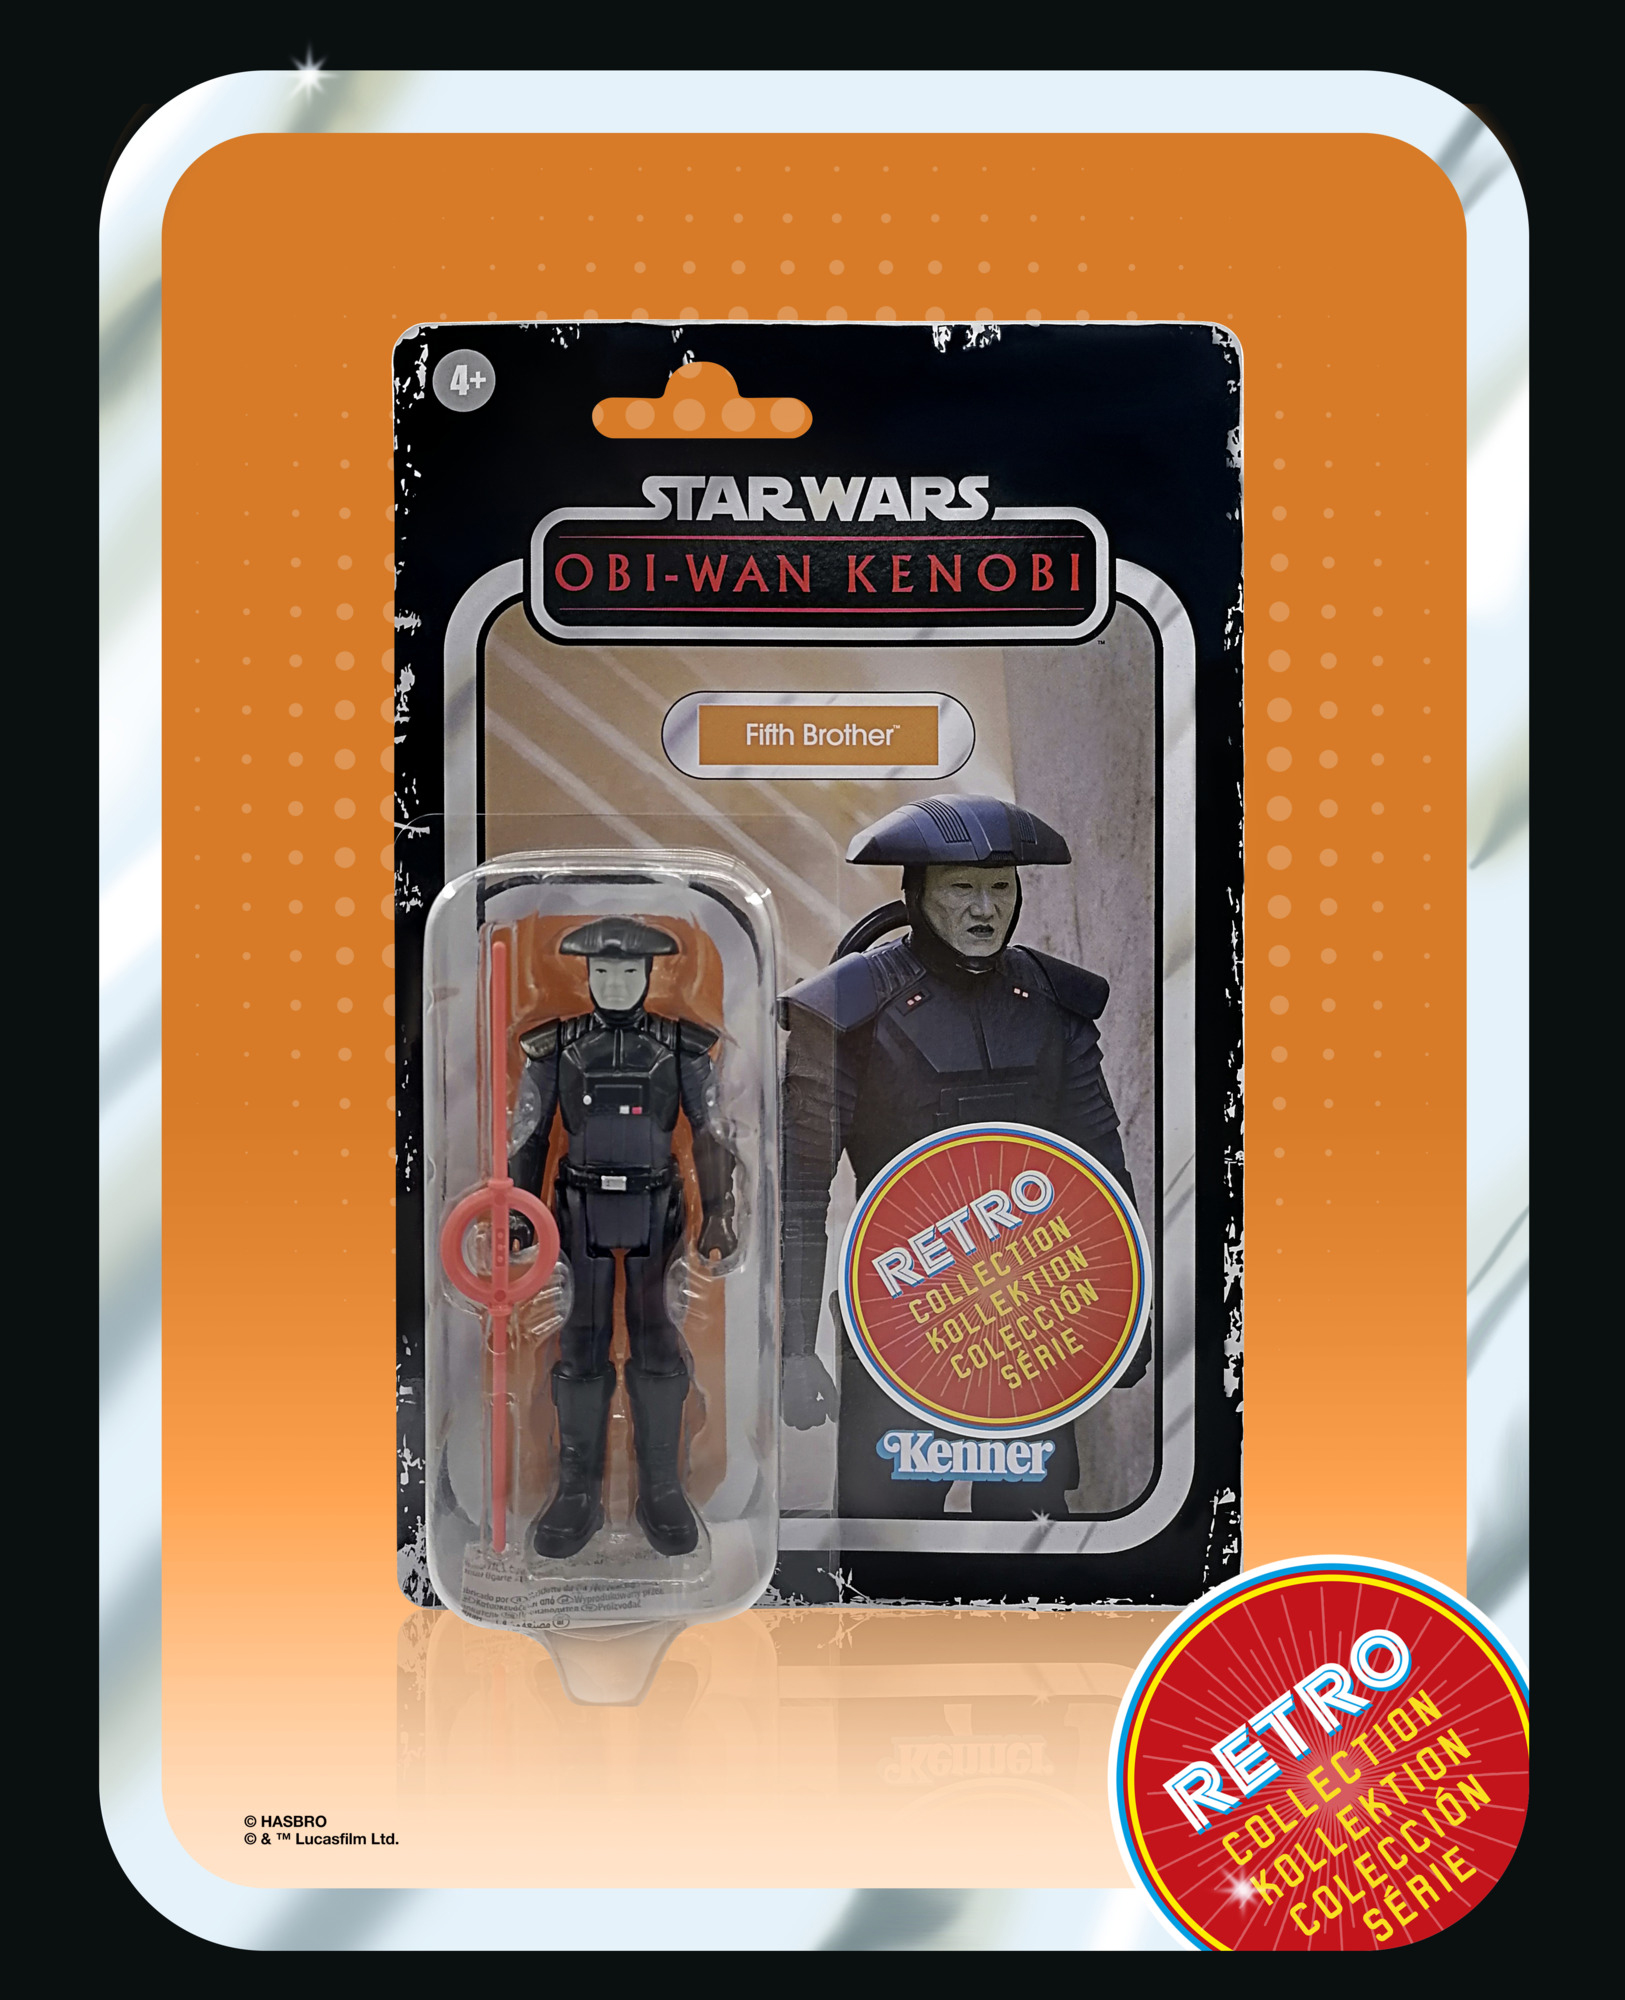 Star Wars The Retro Collection Fifth Brother